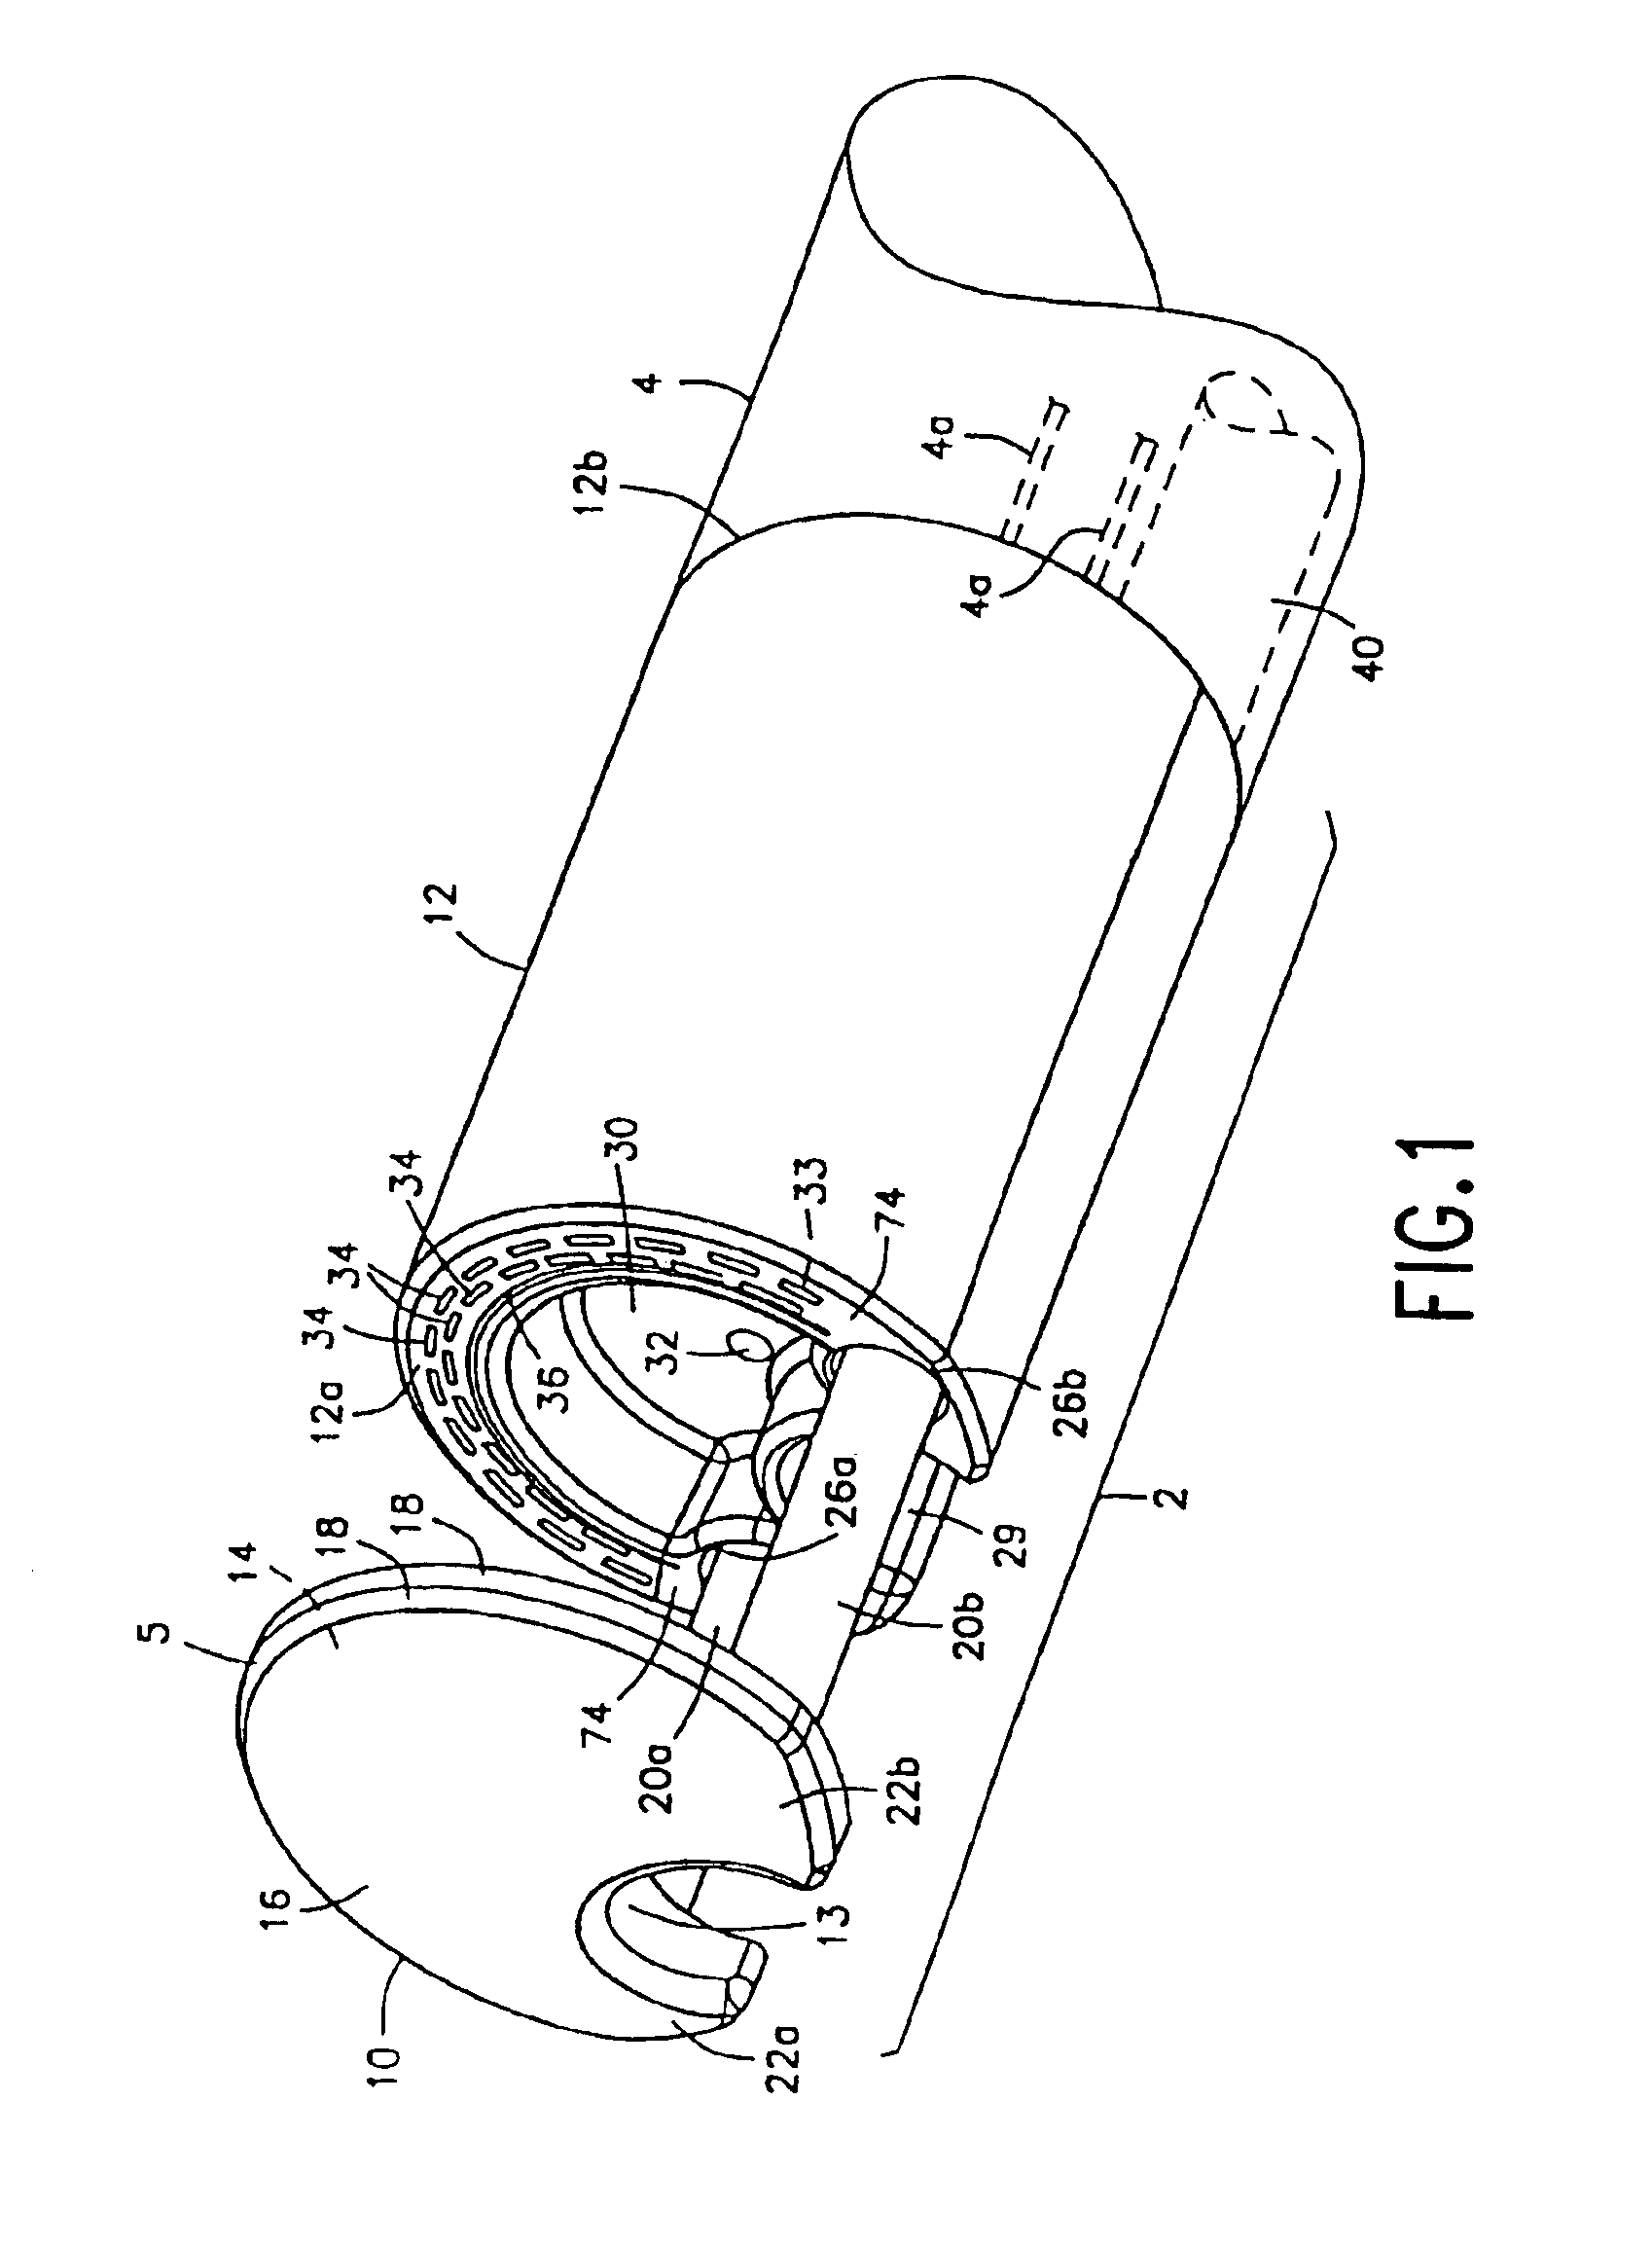 Integrated surgical staple retainer for a full thickness resectioning device